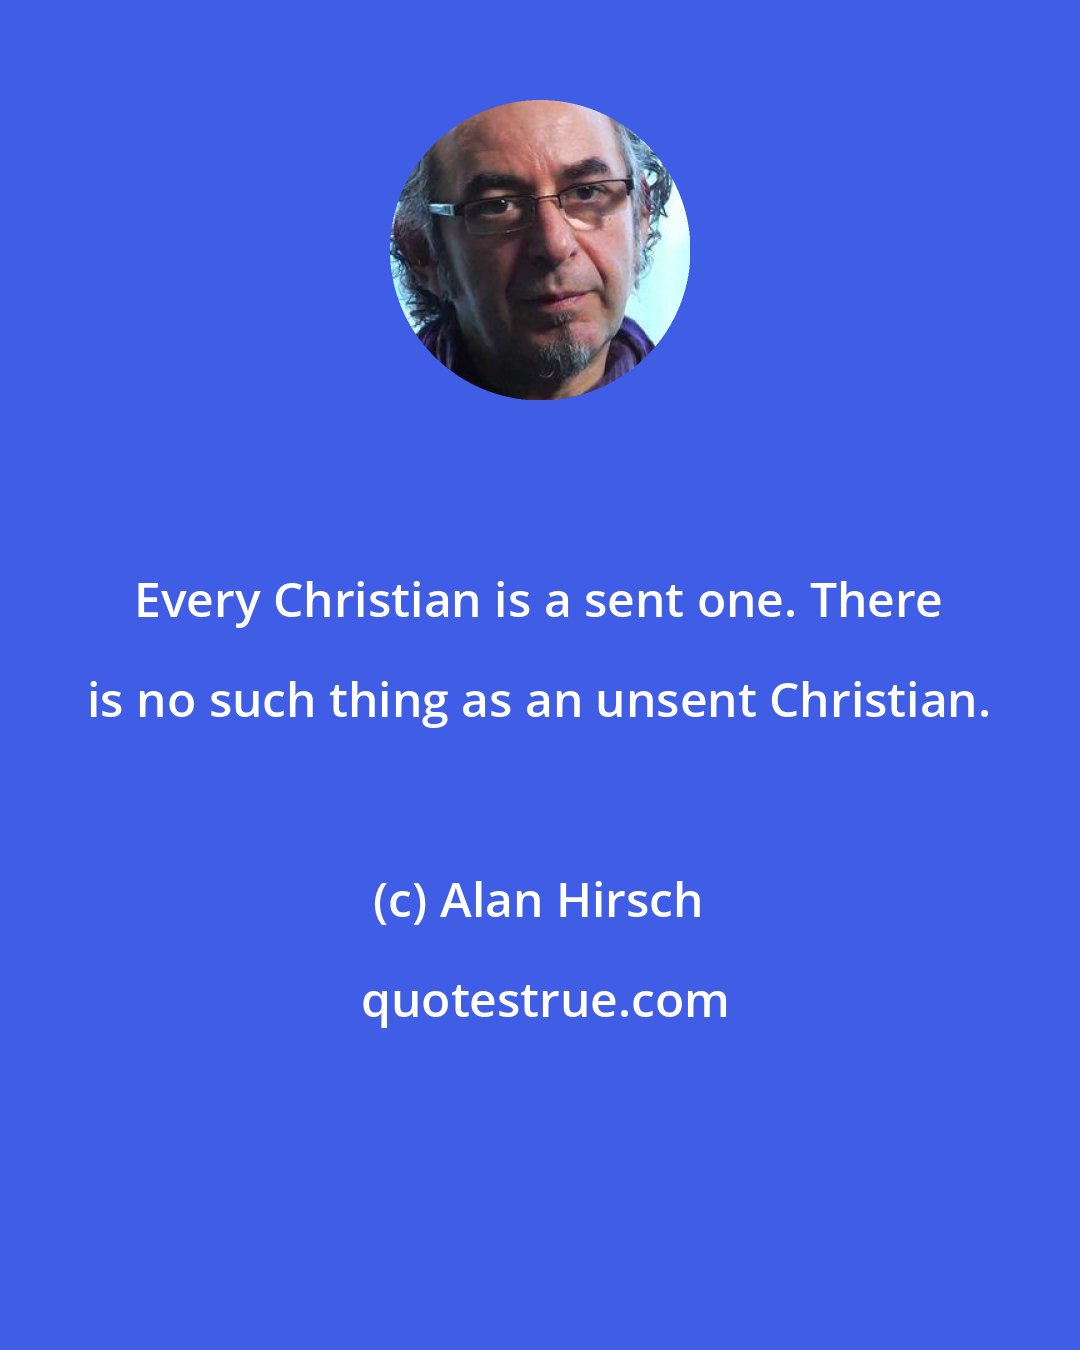 Alan Hirsch: Every Christian is a sent one. There is no such thing as an unsent Christian.